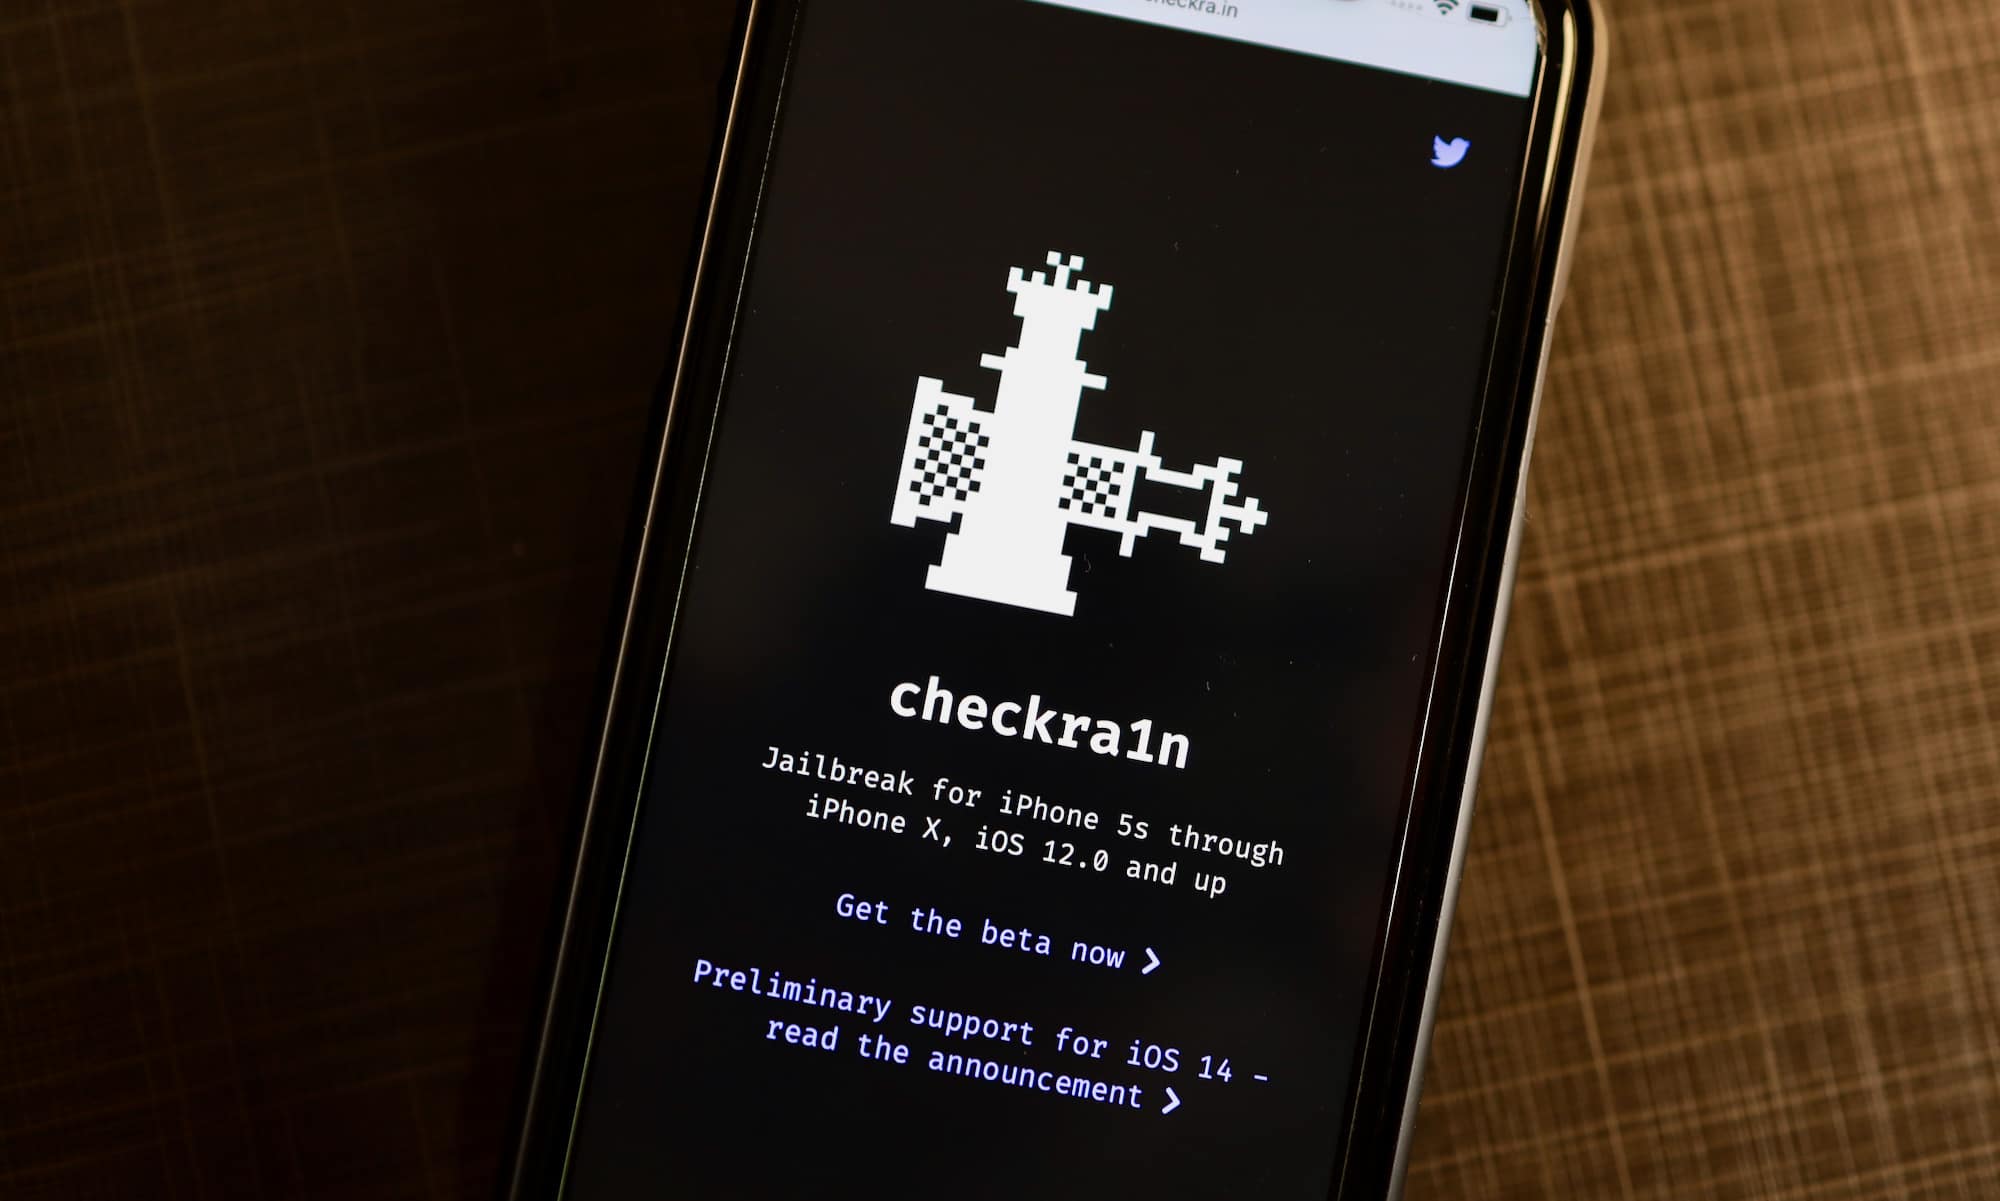 How to Jailbreak iOS on an iPhone or iPad Using CheckRa1n